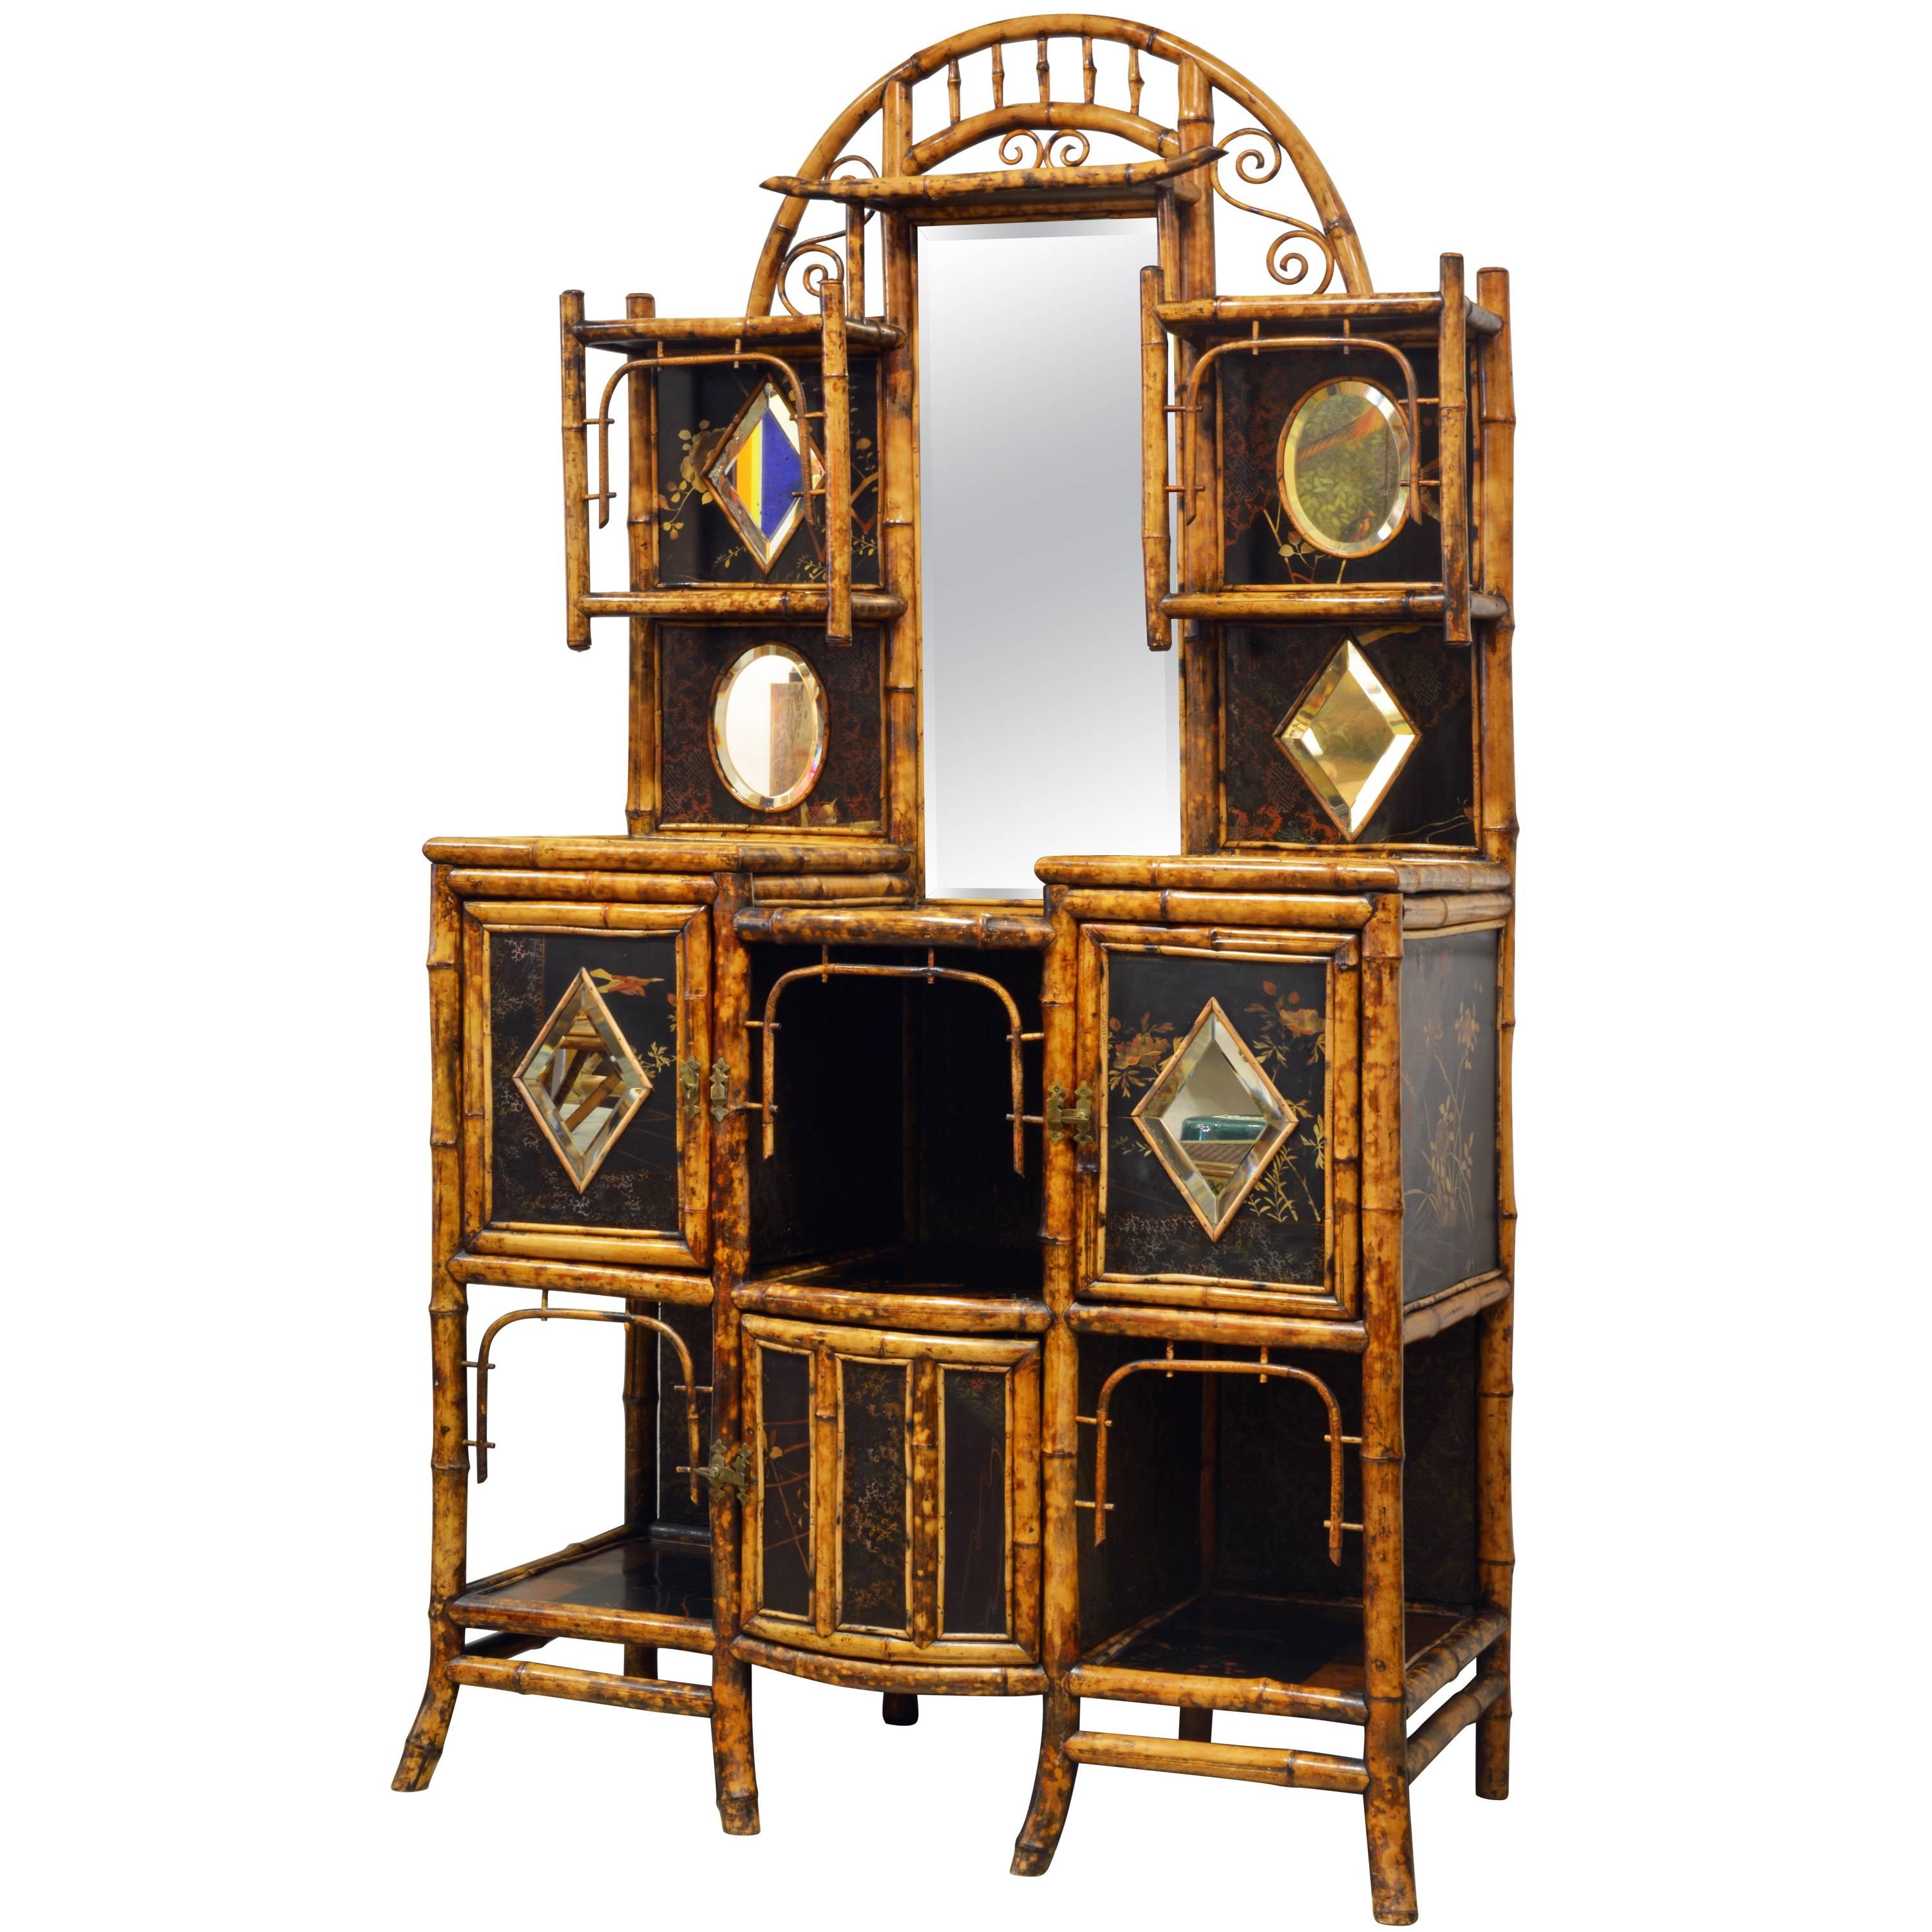 Superior 19th Century English Bamboo and Lacquer Etagere or Hall Tree Cabinet